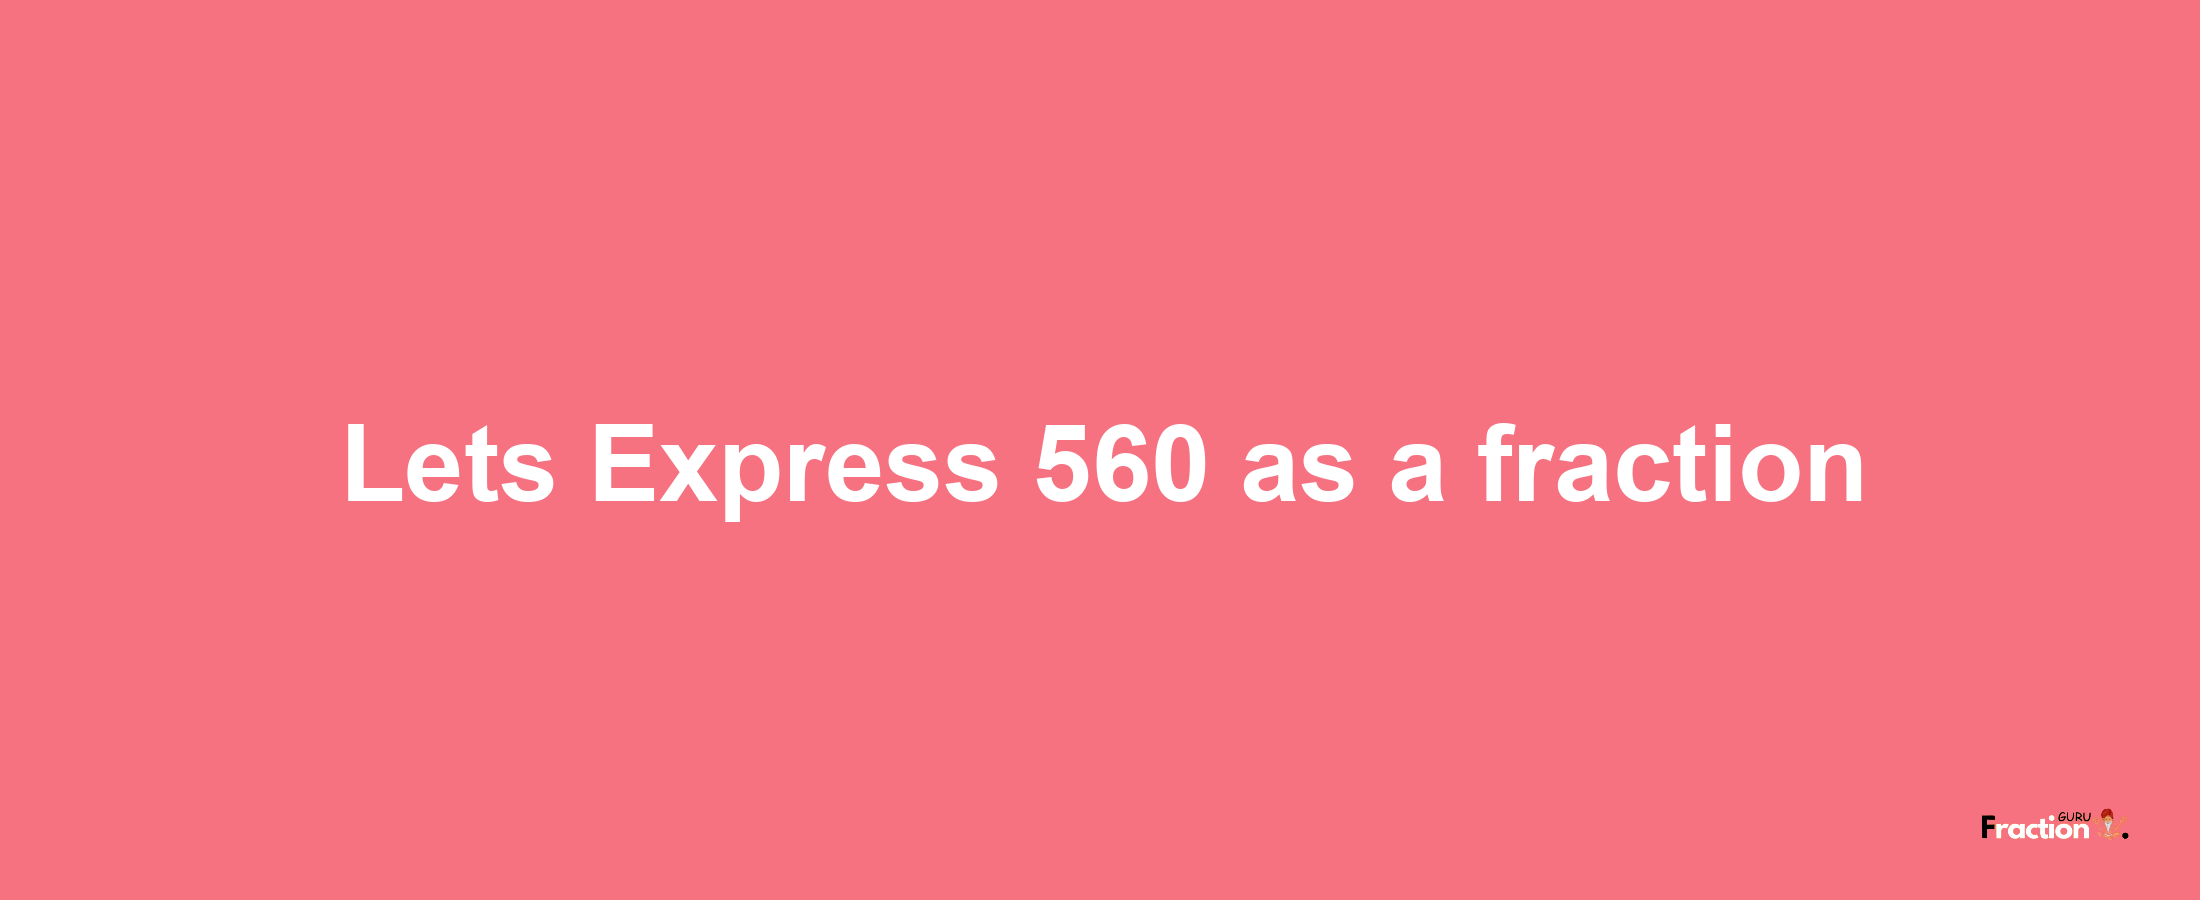 Lets Express 560 as afraction